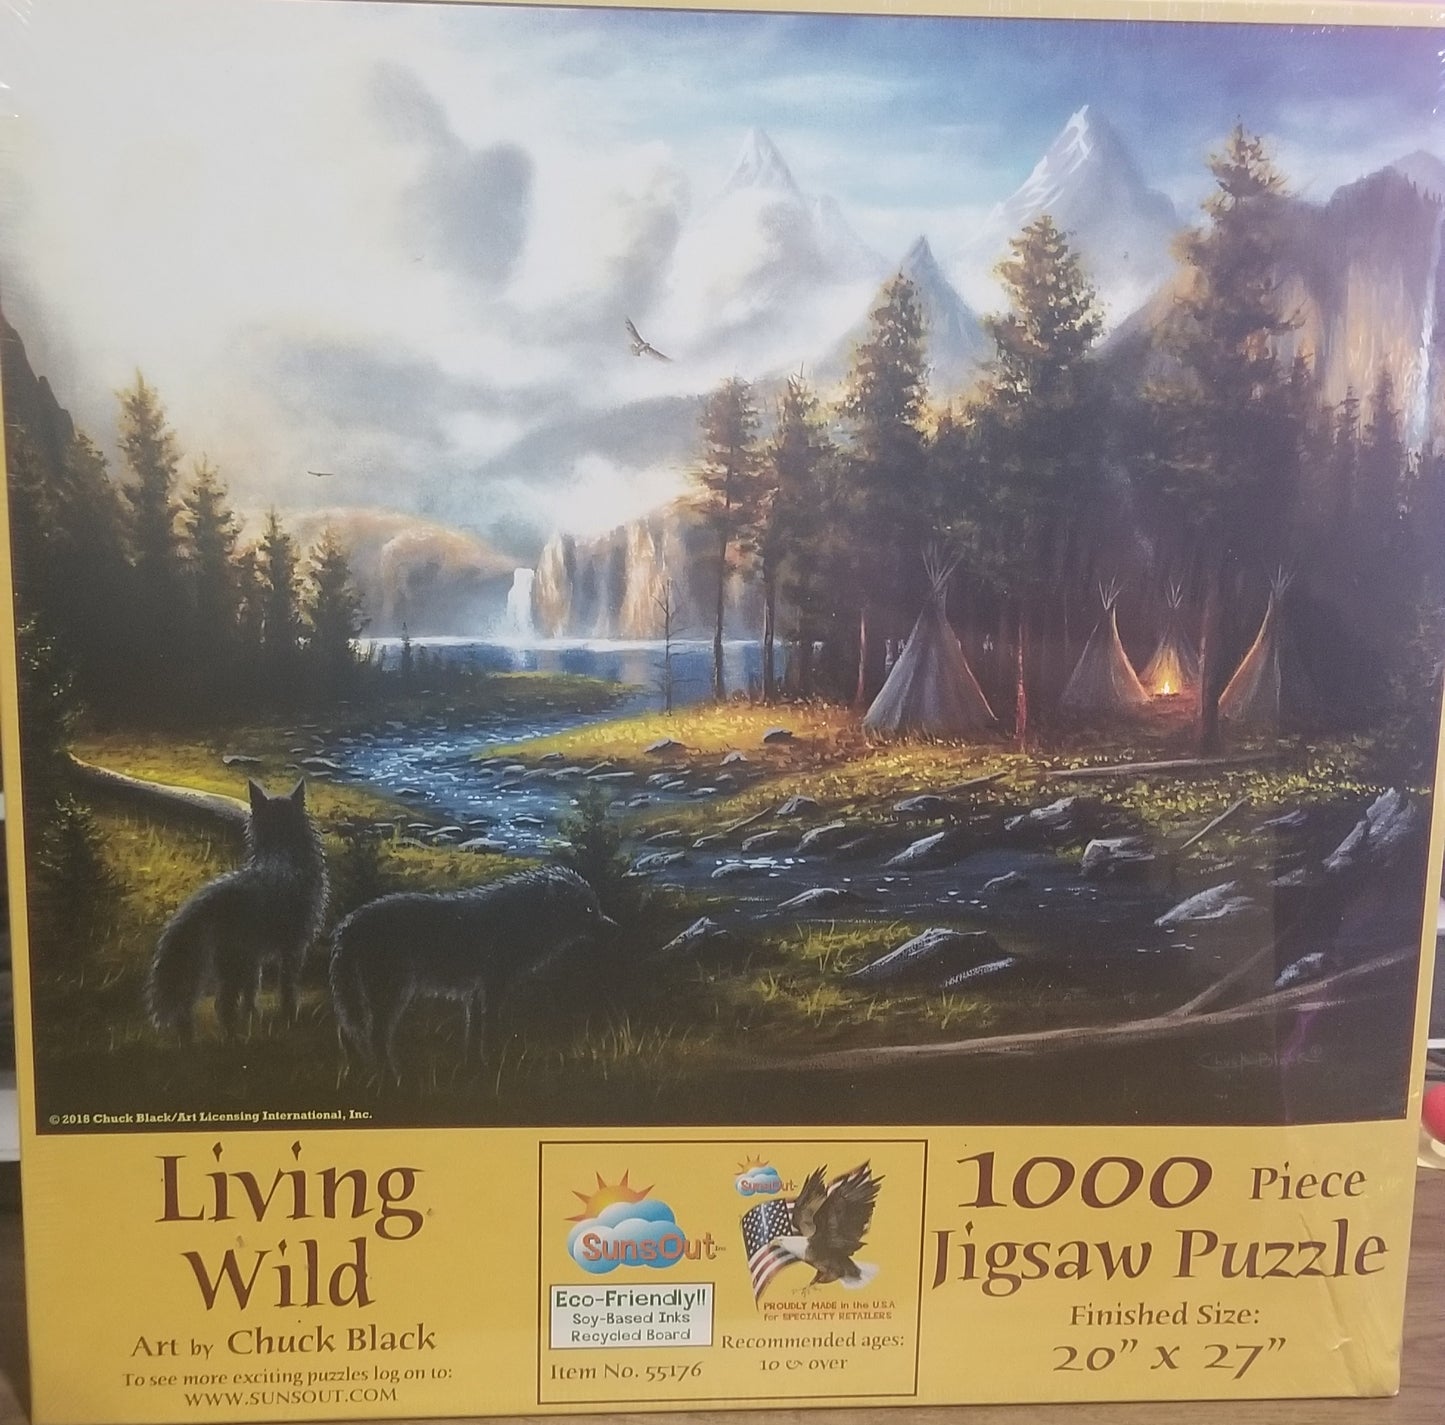 Living Wild by Chuck Black, 1000 Piece Puzzle